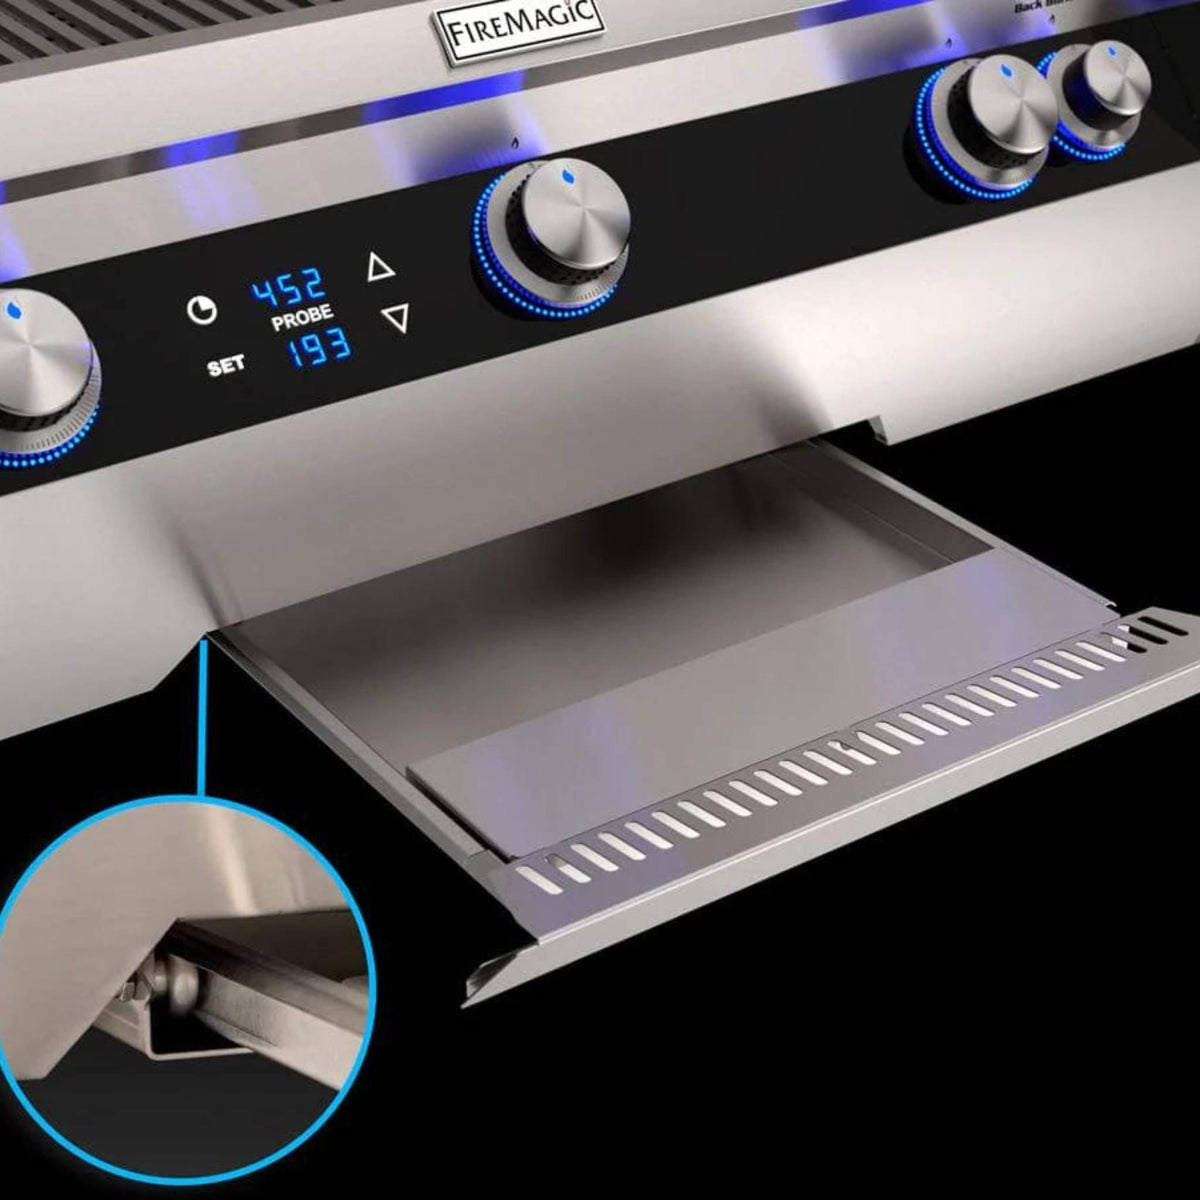 Fire Magic Echelon Built-In Grill With Digital Thermometer